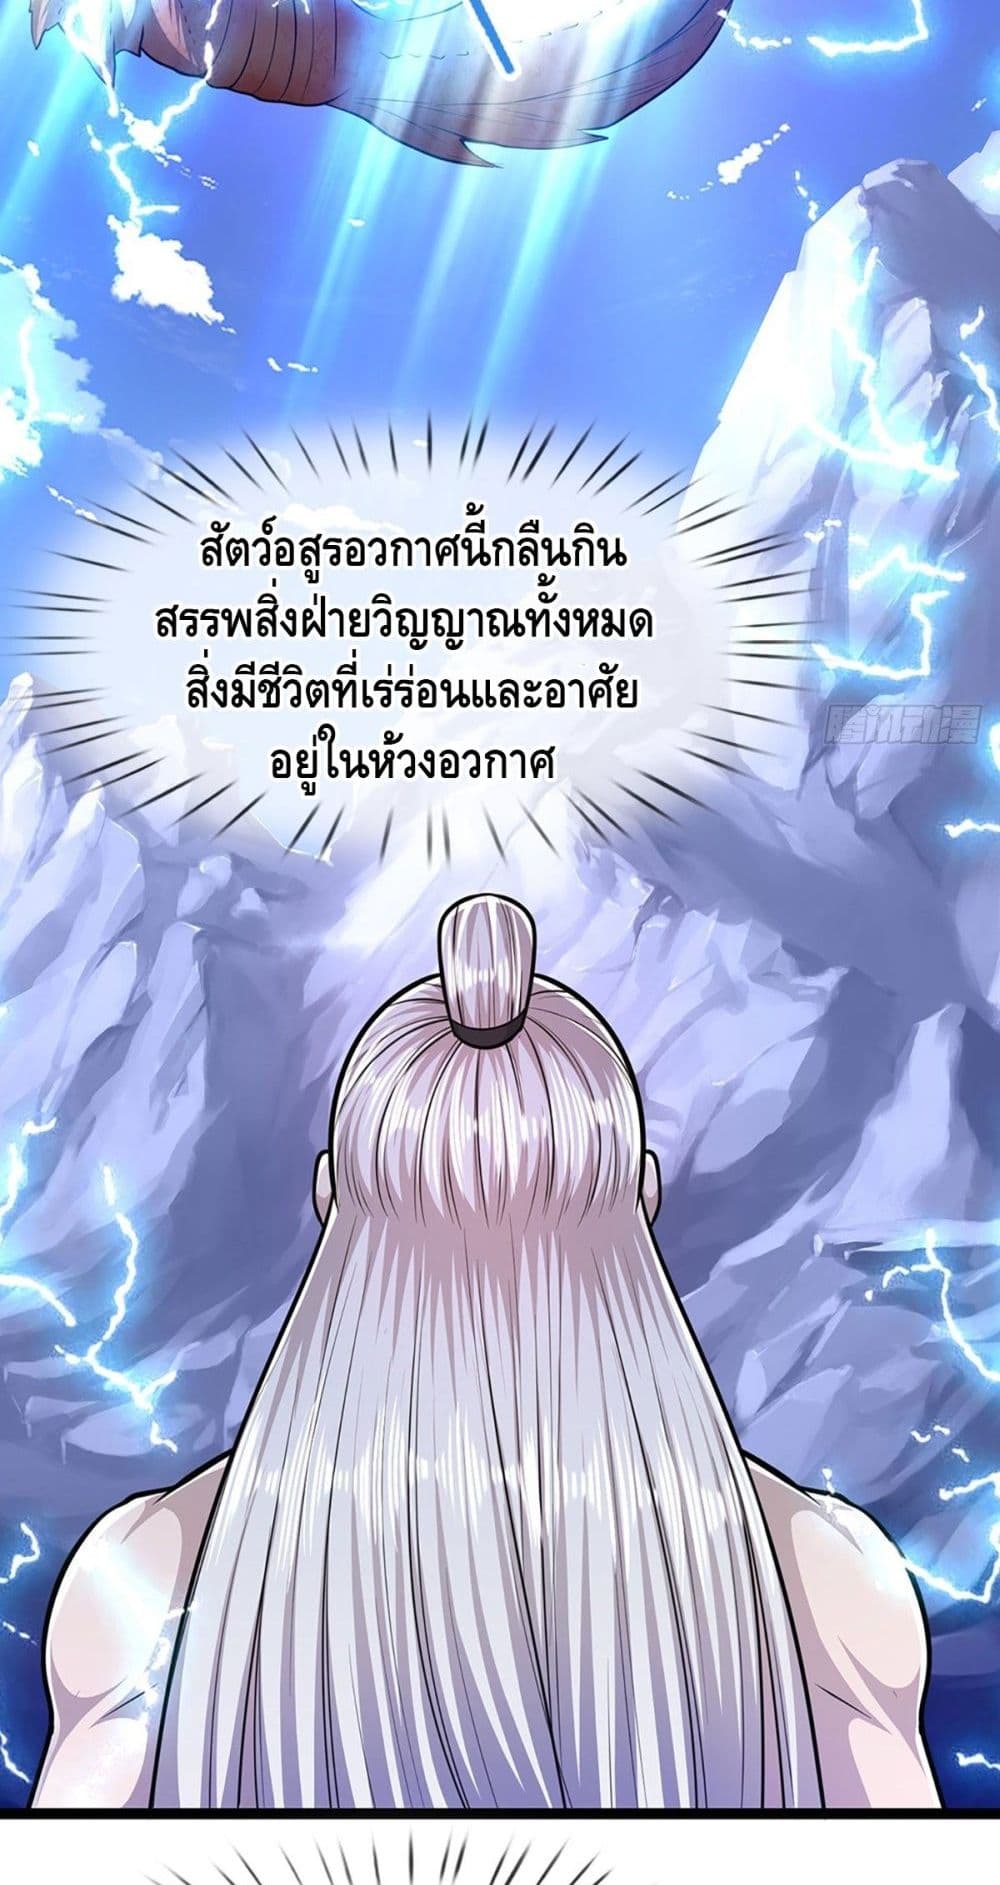 Disciples All Over the World à¸à¸­à¸à¸à¸µà¹ 65 (24)